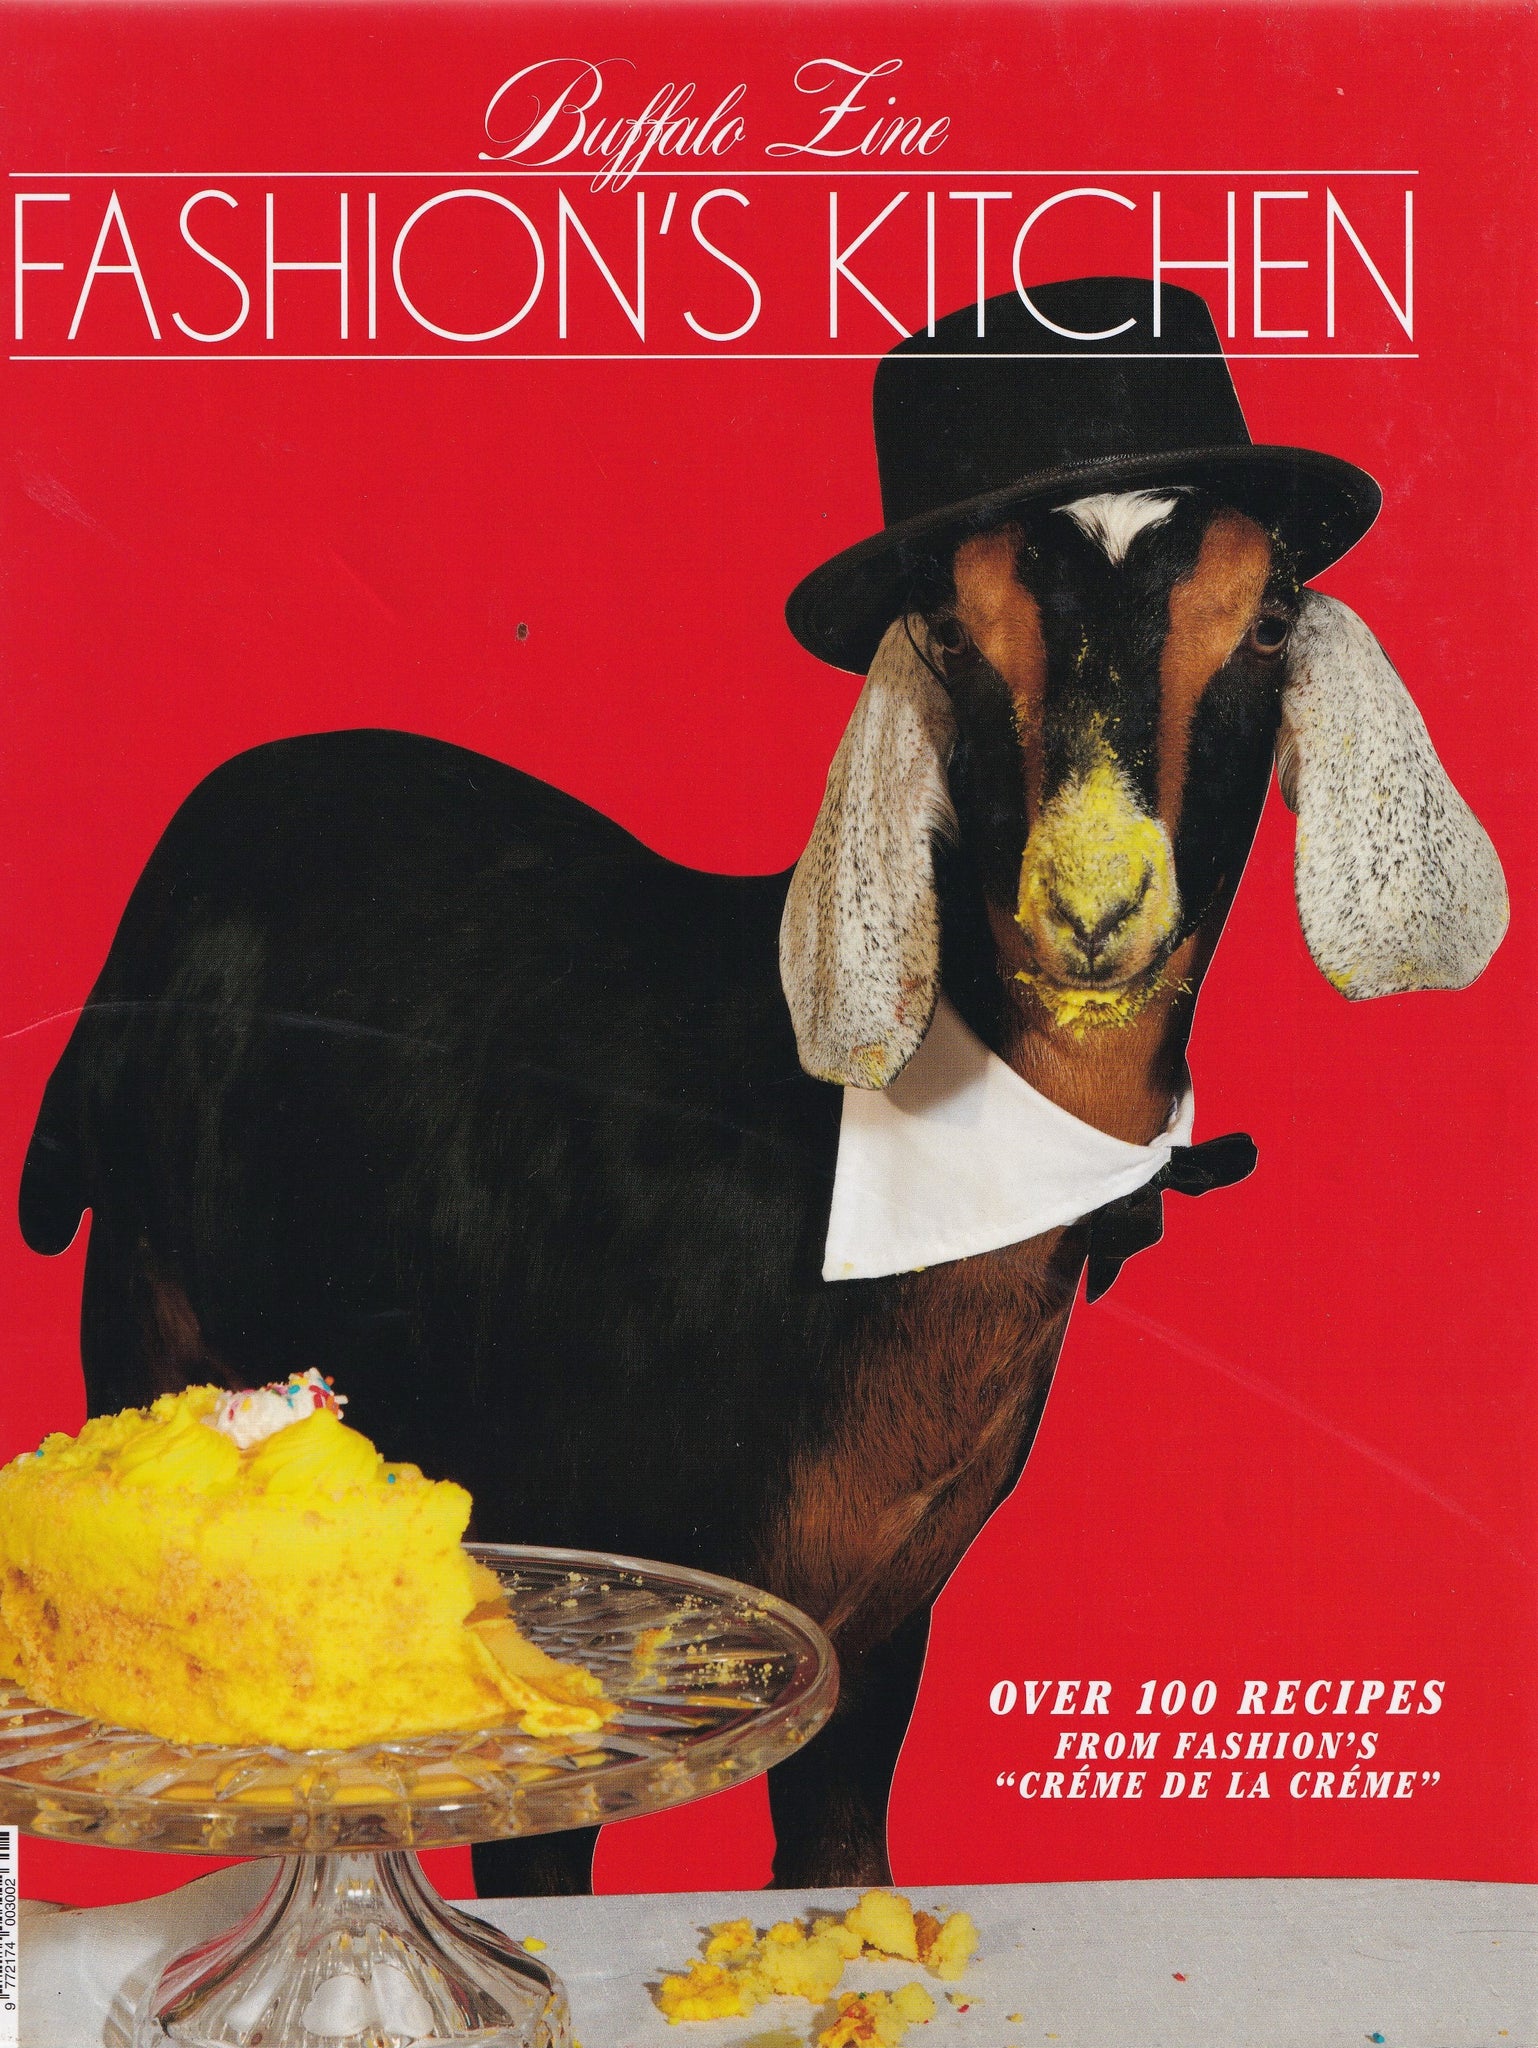 Photo of cookbook called 'Fashion's Kitchen' by Buffalo Zines. Sold in Melbourne boutique called Error404store.